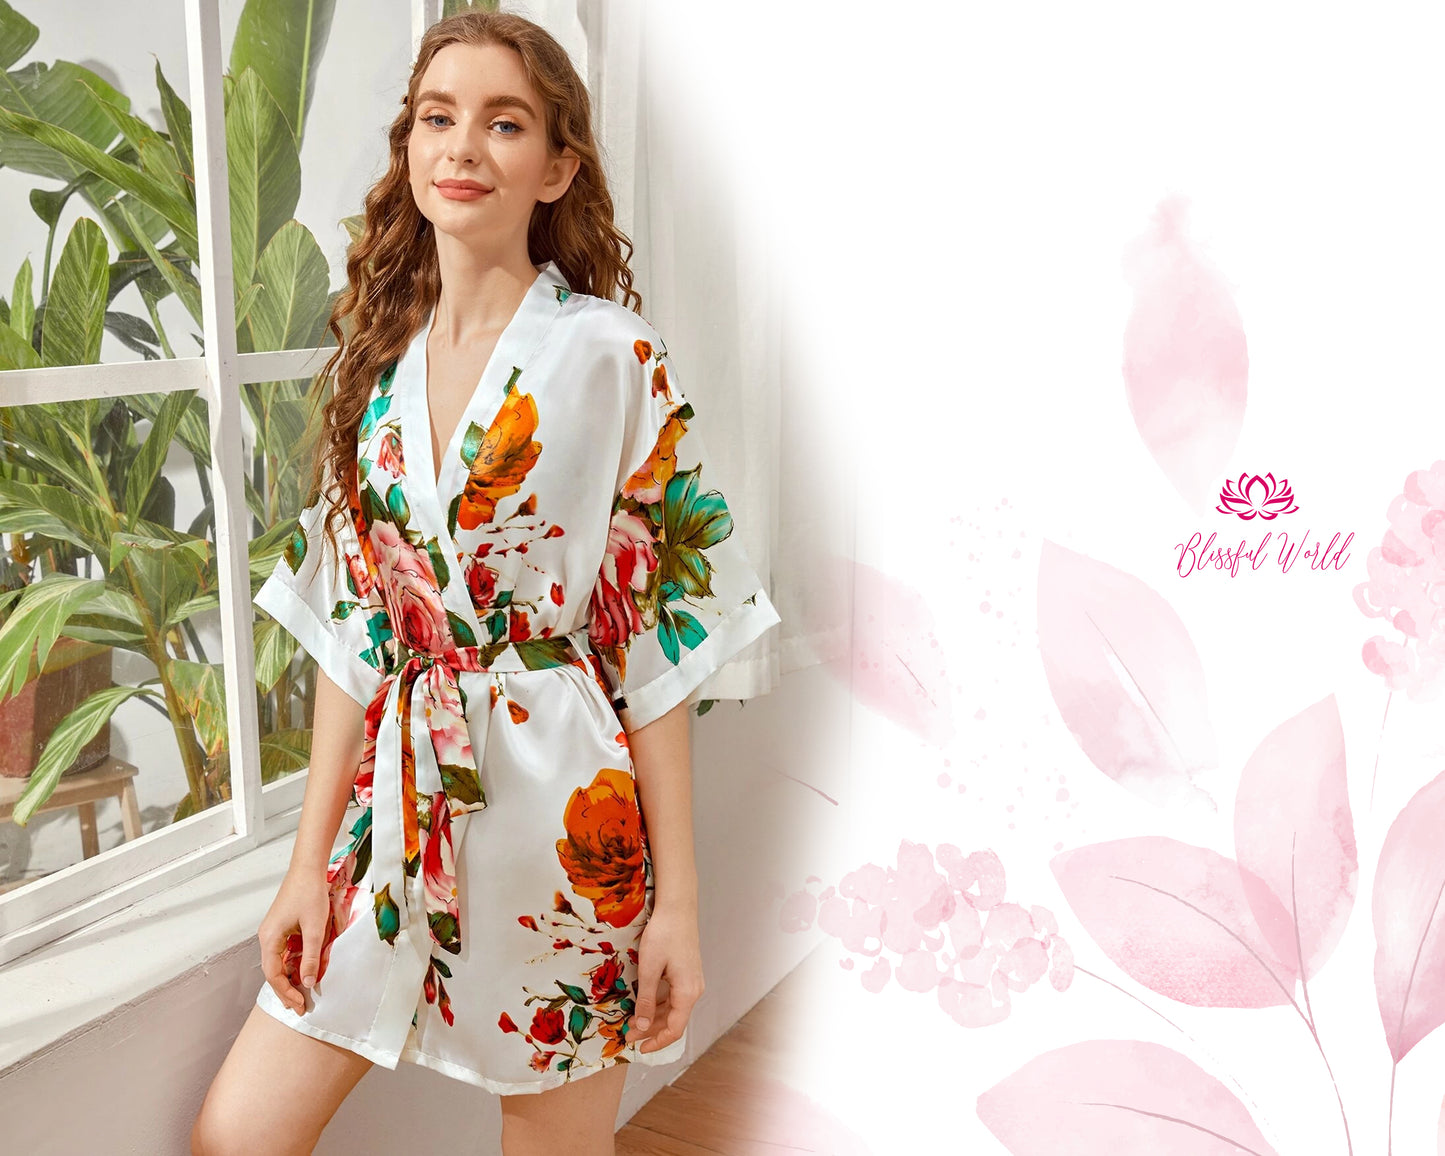 Printed Floral Robes Customized New Rose Print Robes Bridesmaid Robe Personalized Robes Custom Robes Bridal Robe Kimono Robes Satin Robe gift for her Robes getting ready robes